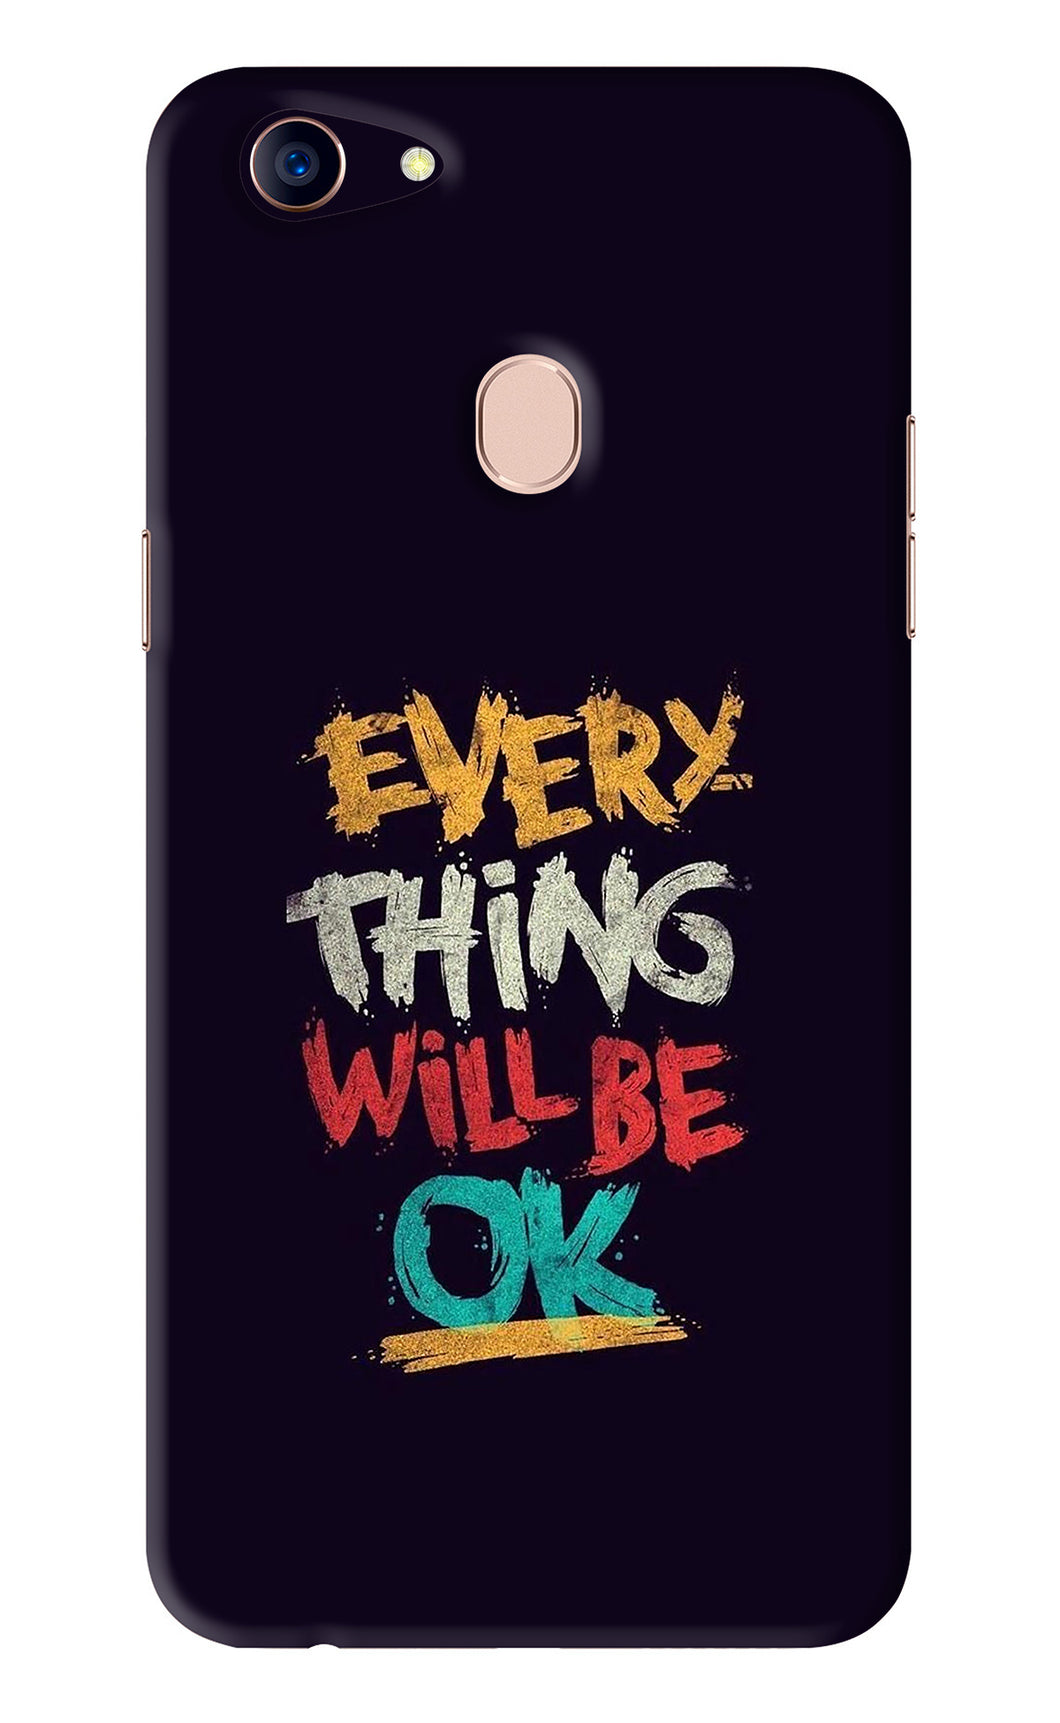 Everything Will Be Ok Oppo F5 Back Skin Wrap